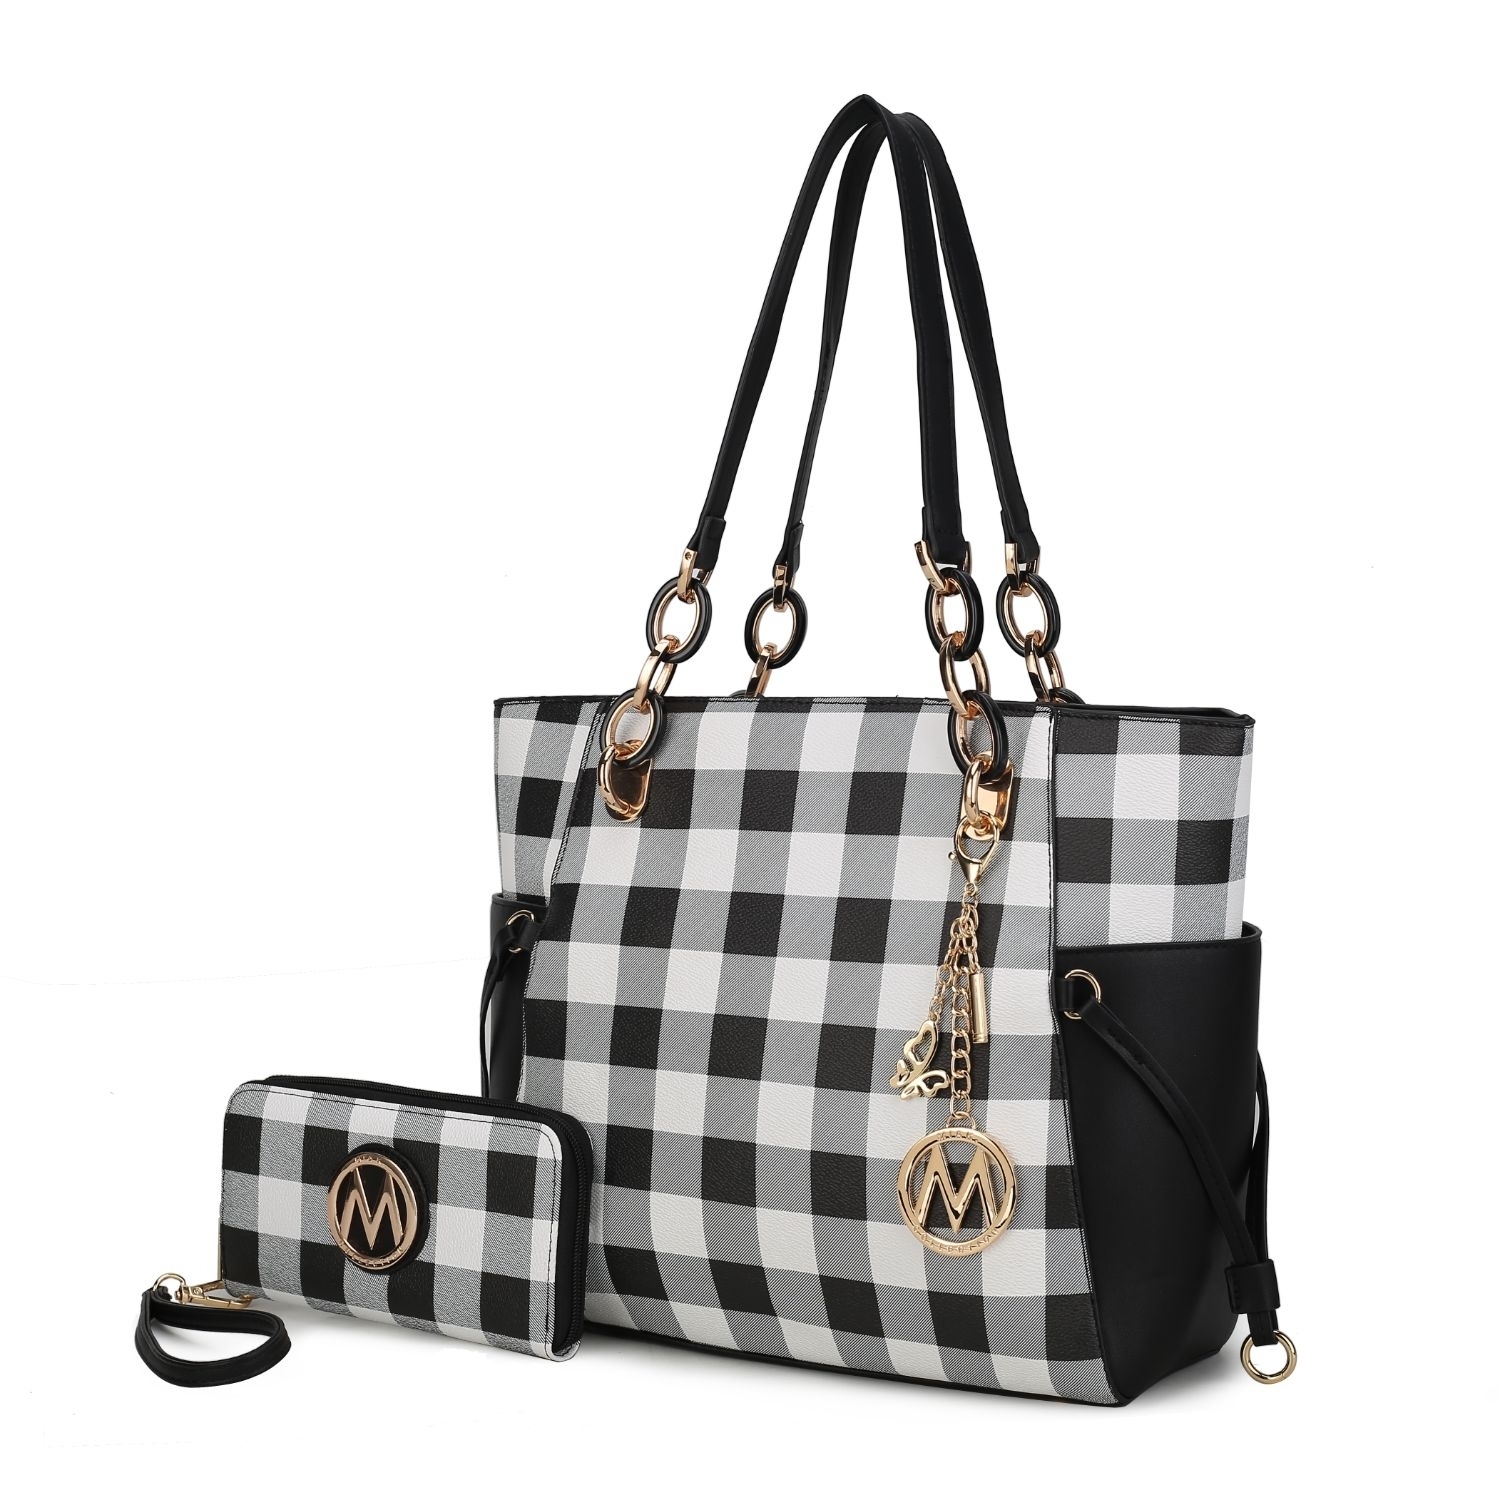 MKF Collection Yale Checkered Tote Handbag With Wallet By Mia K. - Olive